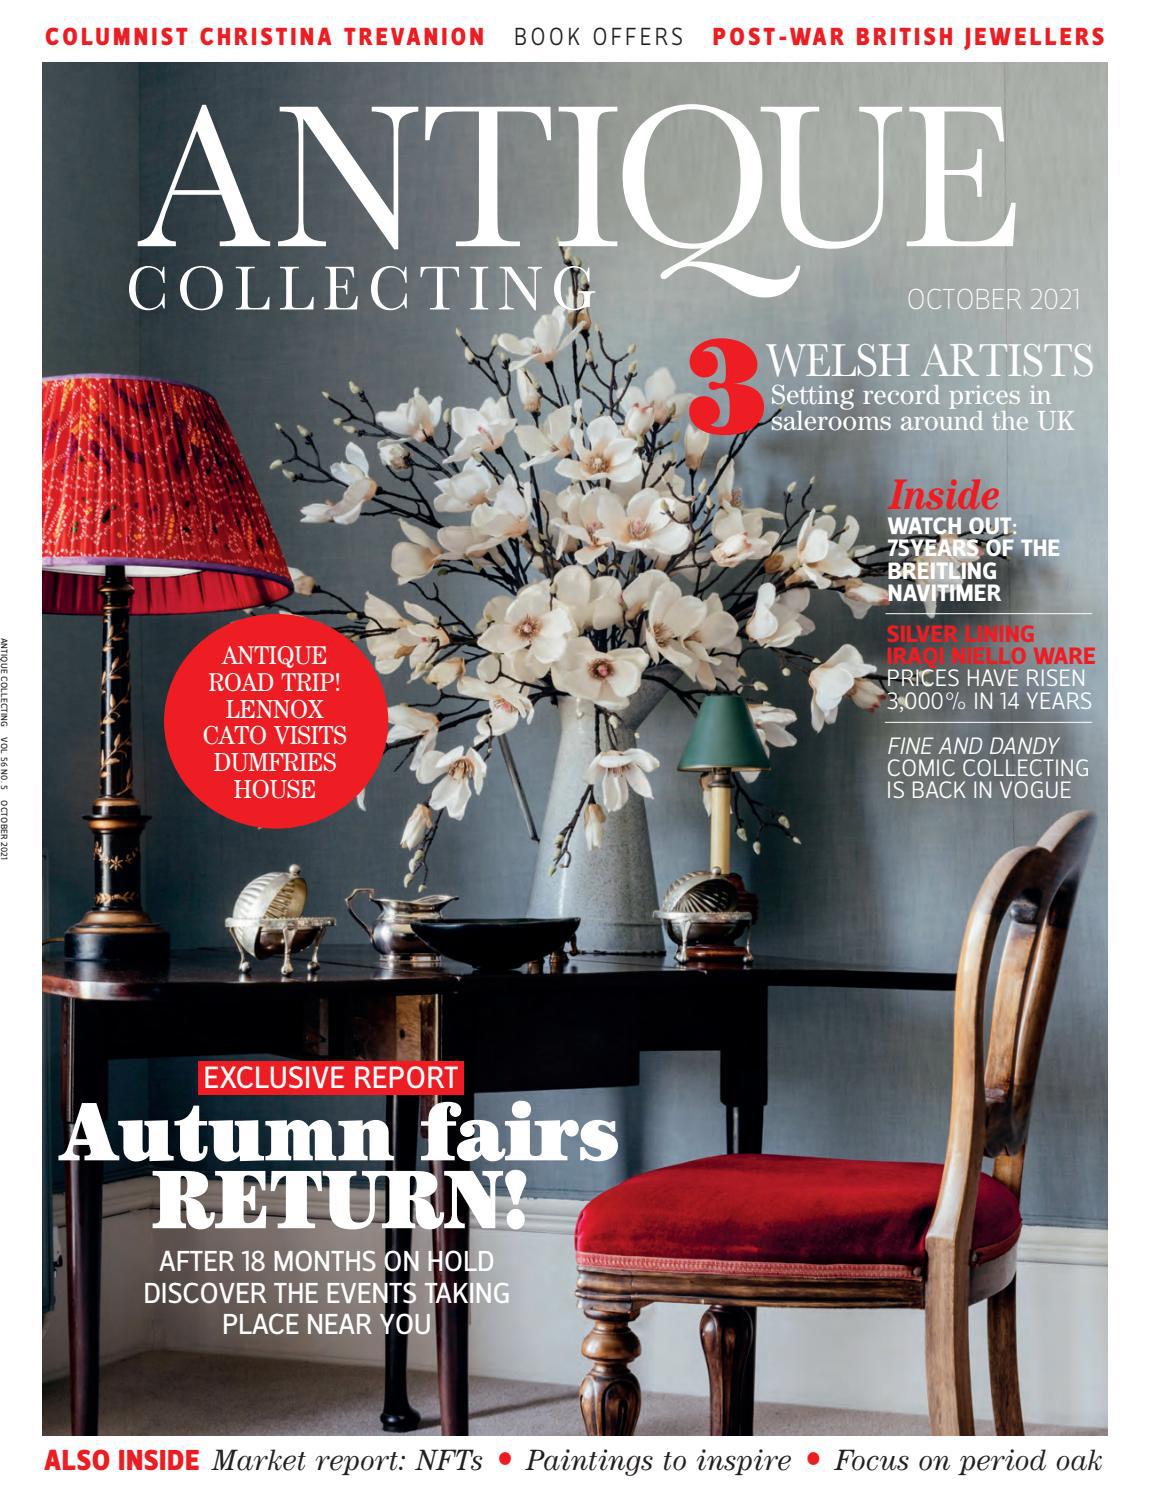 October issue of Antique Collecting magazine